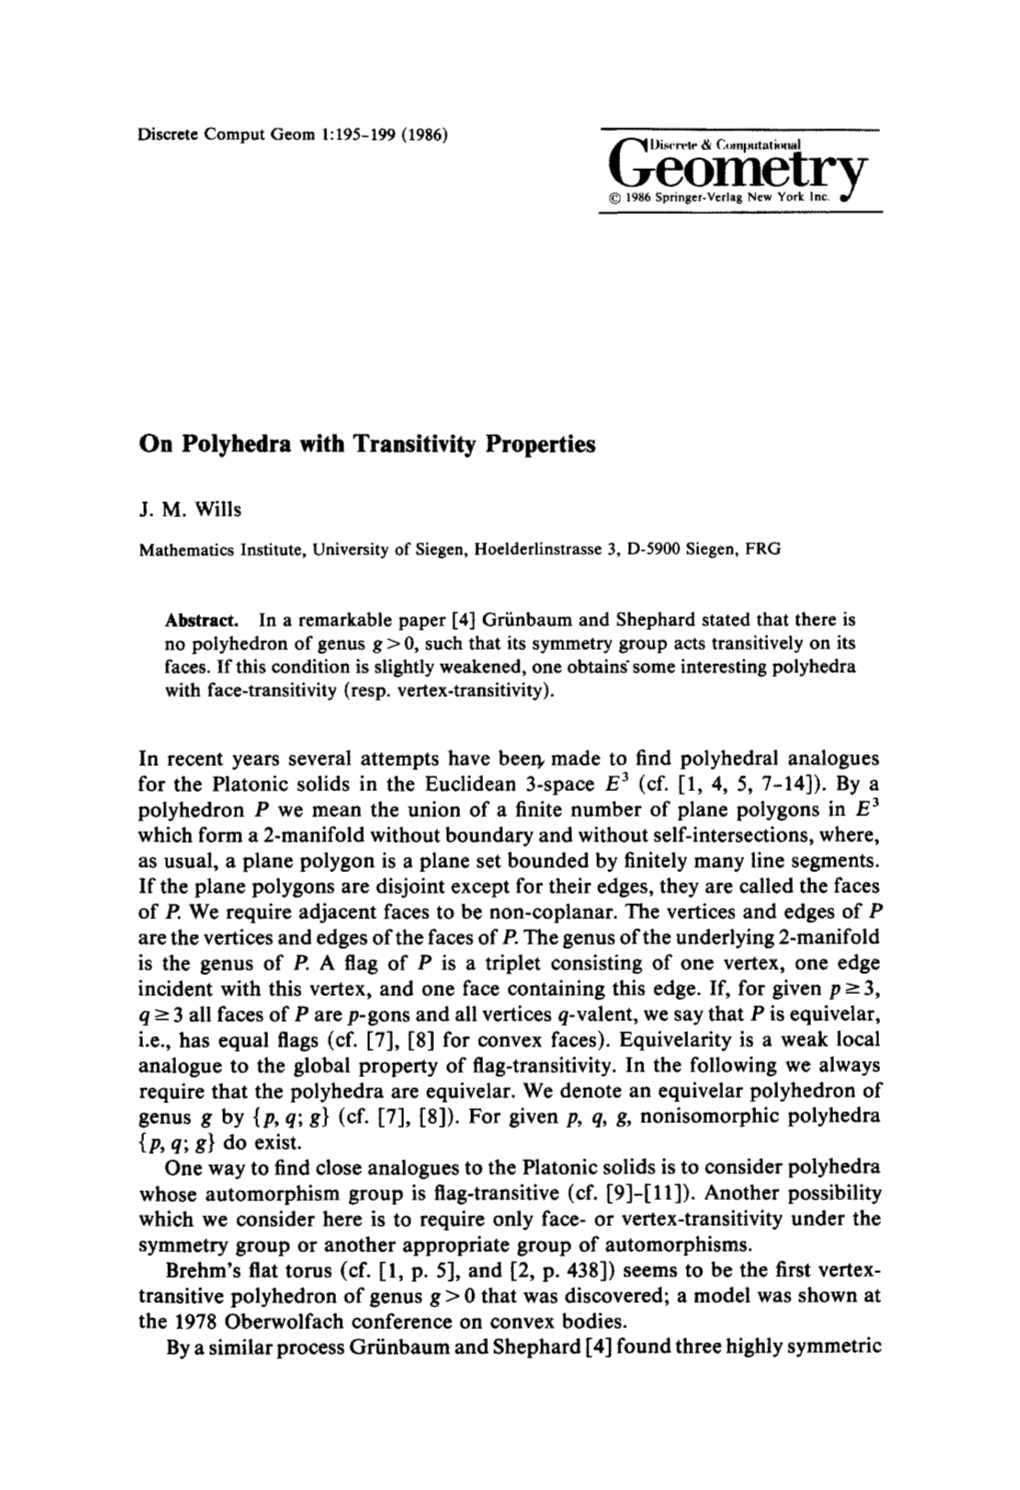 On Polyhedra with Transitivity Properties